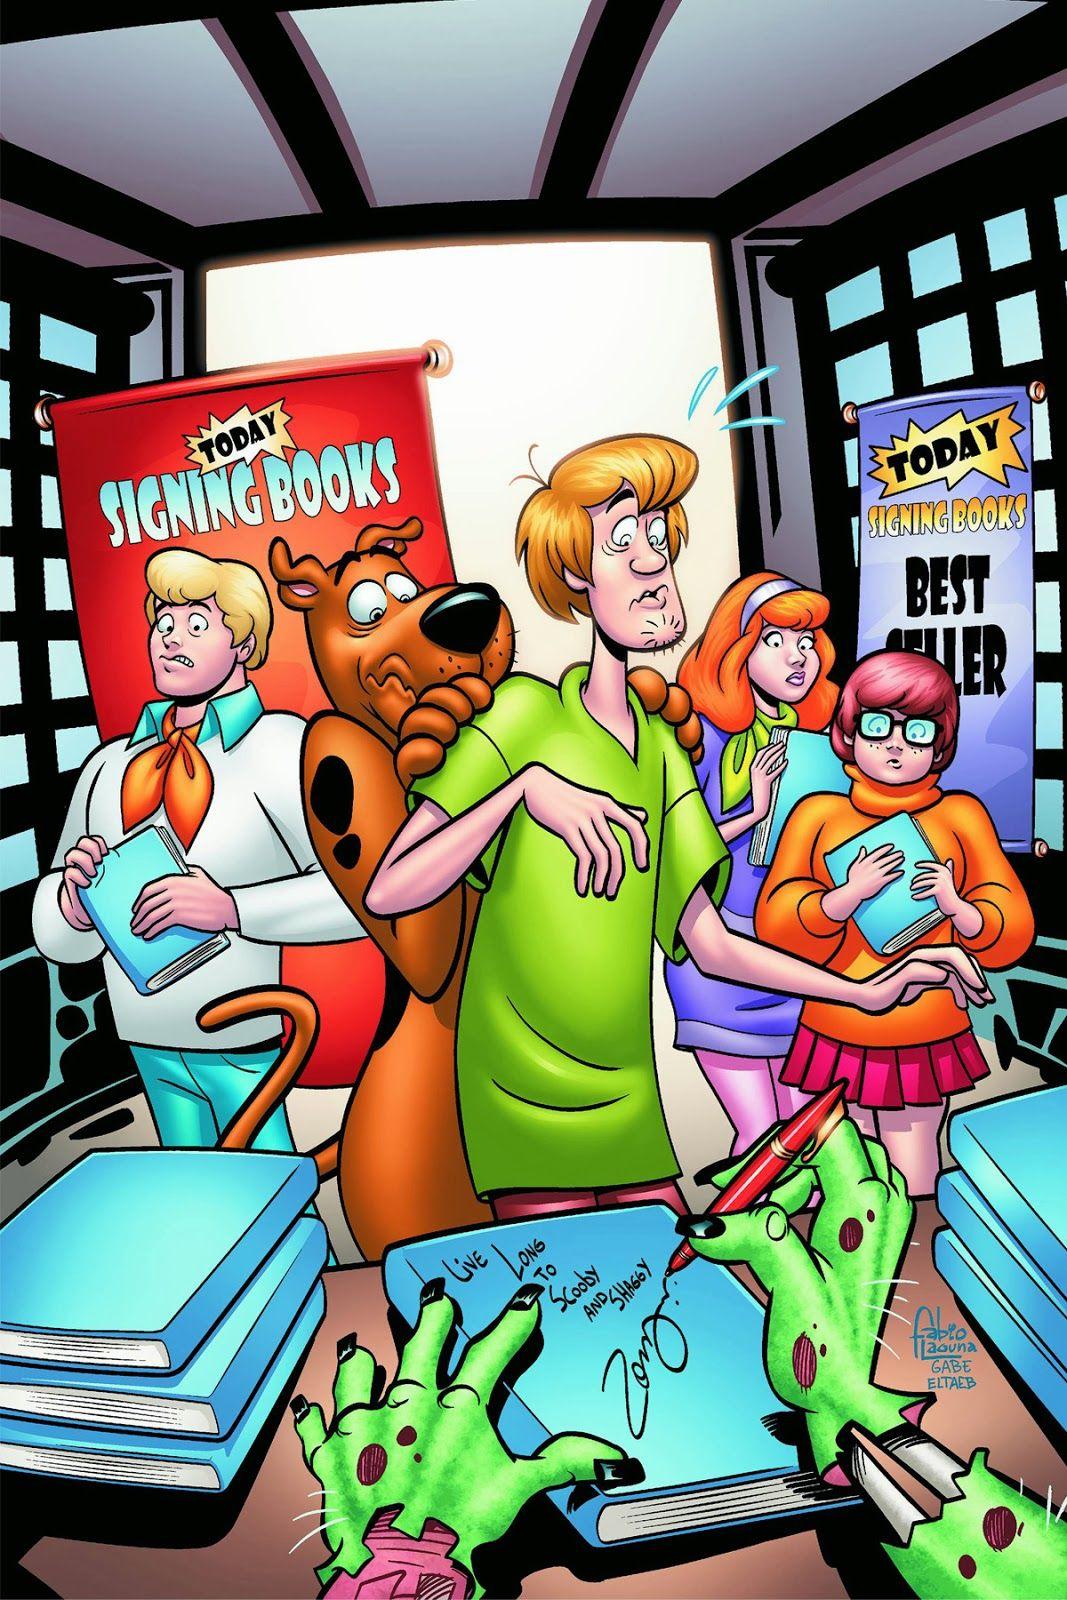 Scooby Doo Movie Cool Wallpaper for Iphone and Samsung Galaxy Samsung  Galaxy s6 black  Amazonca Electronics